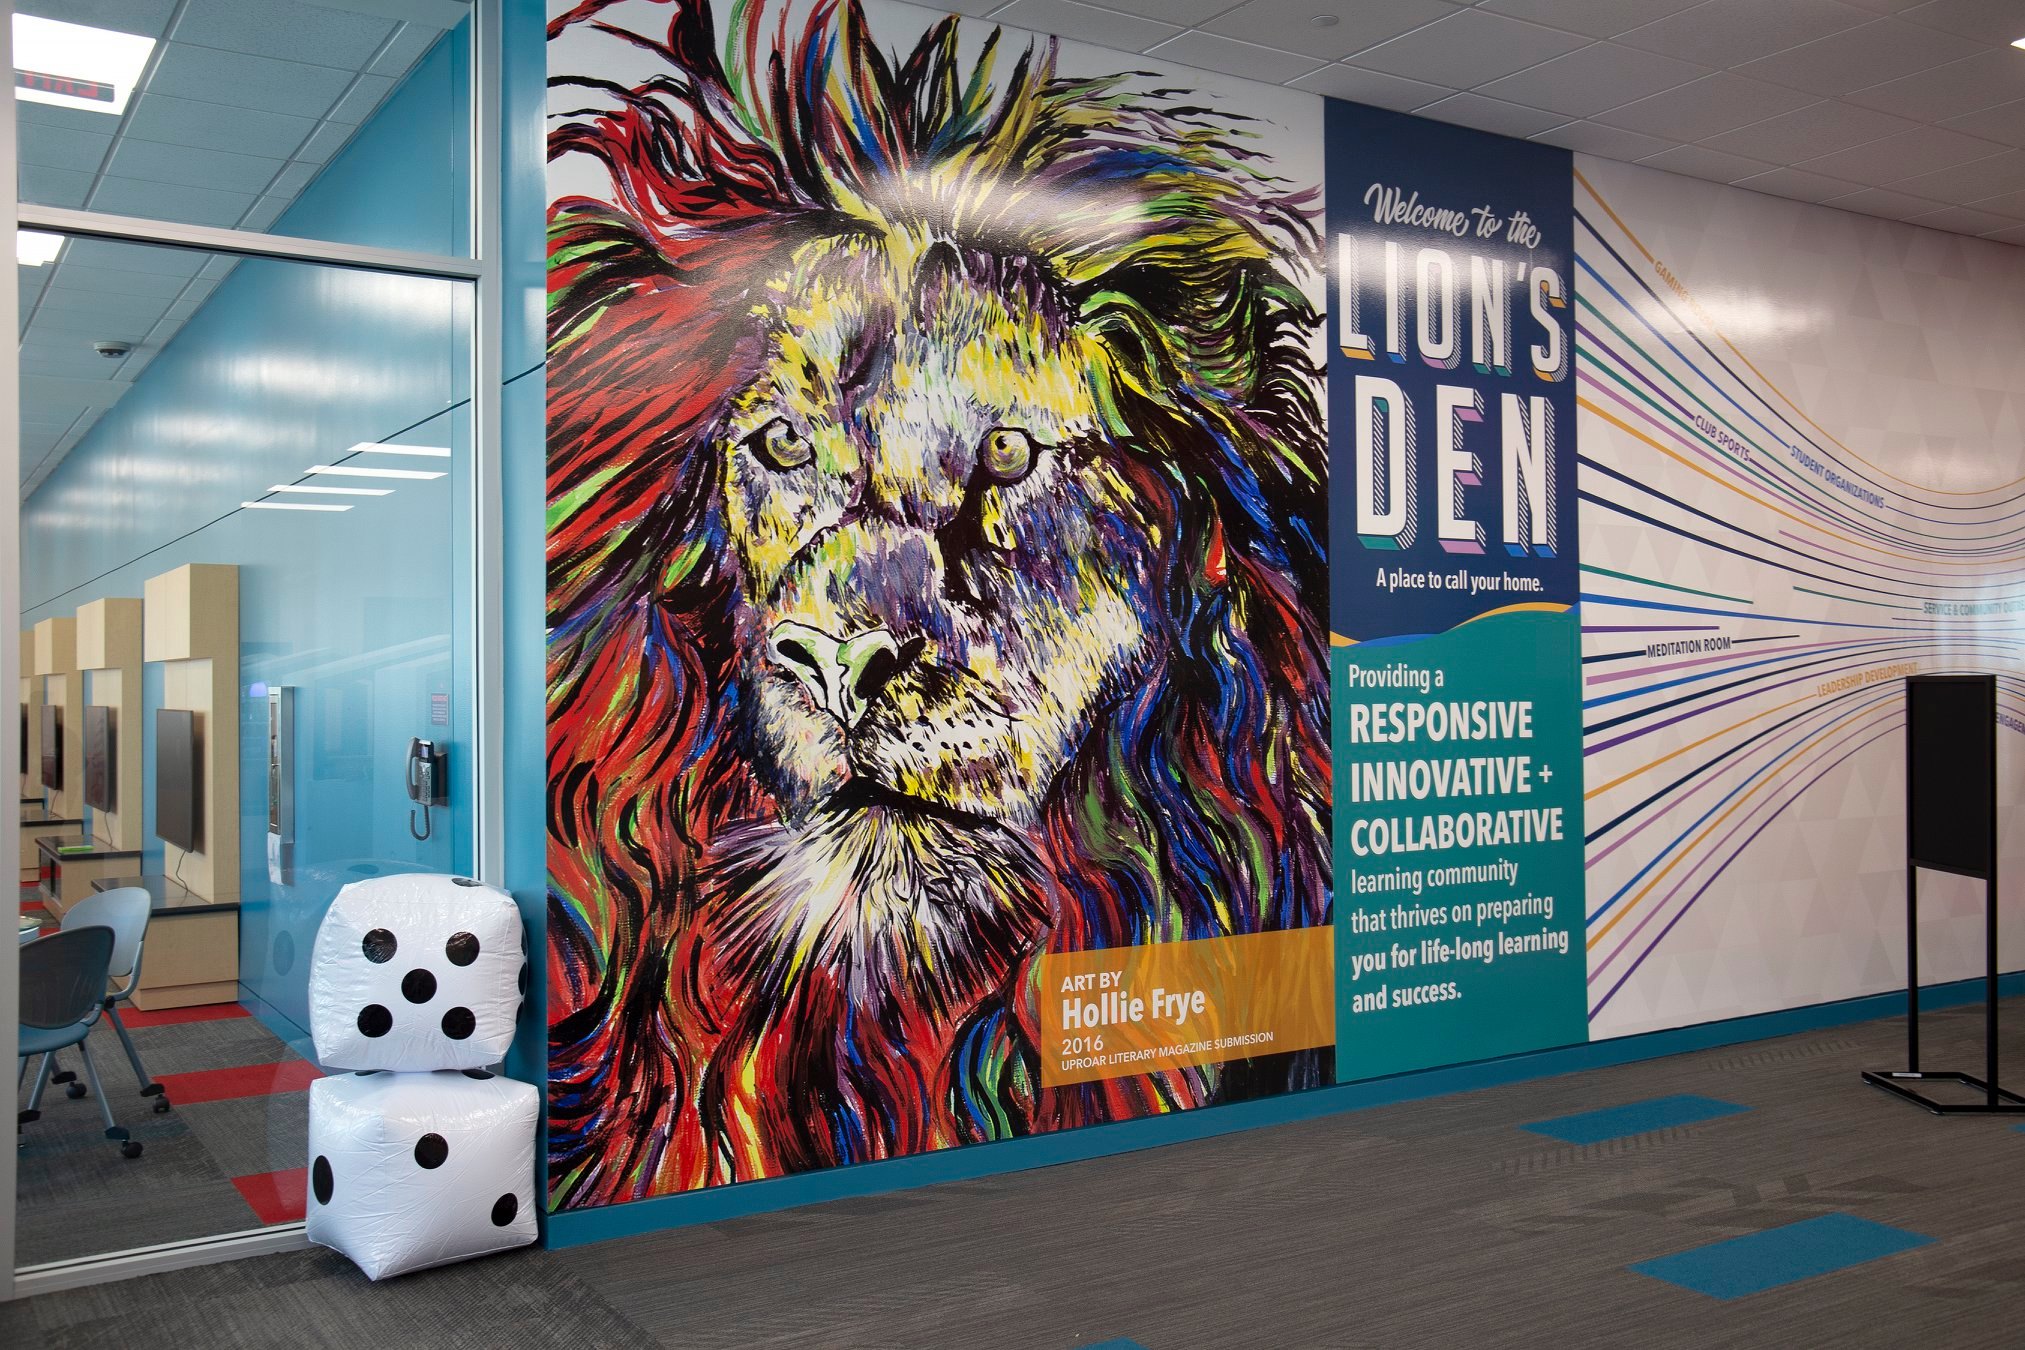 The Lion's Den Mural outside of meeting space